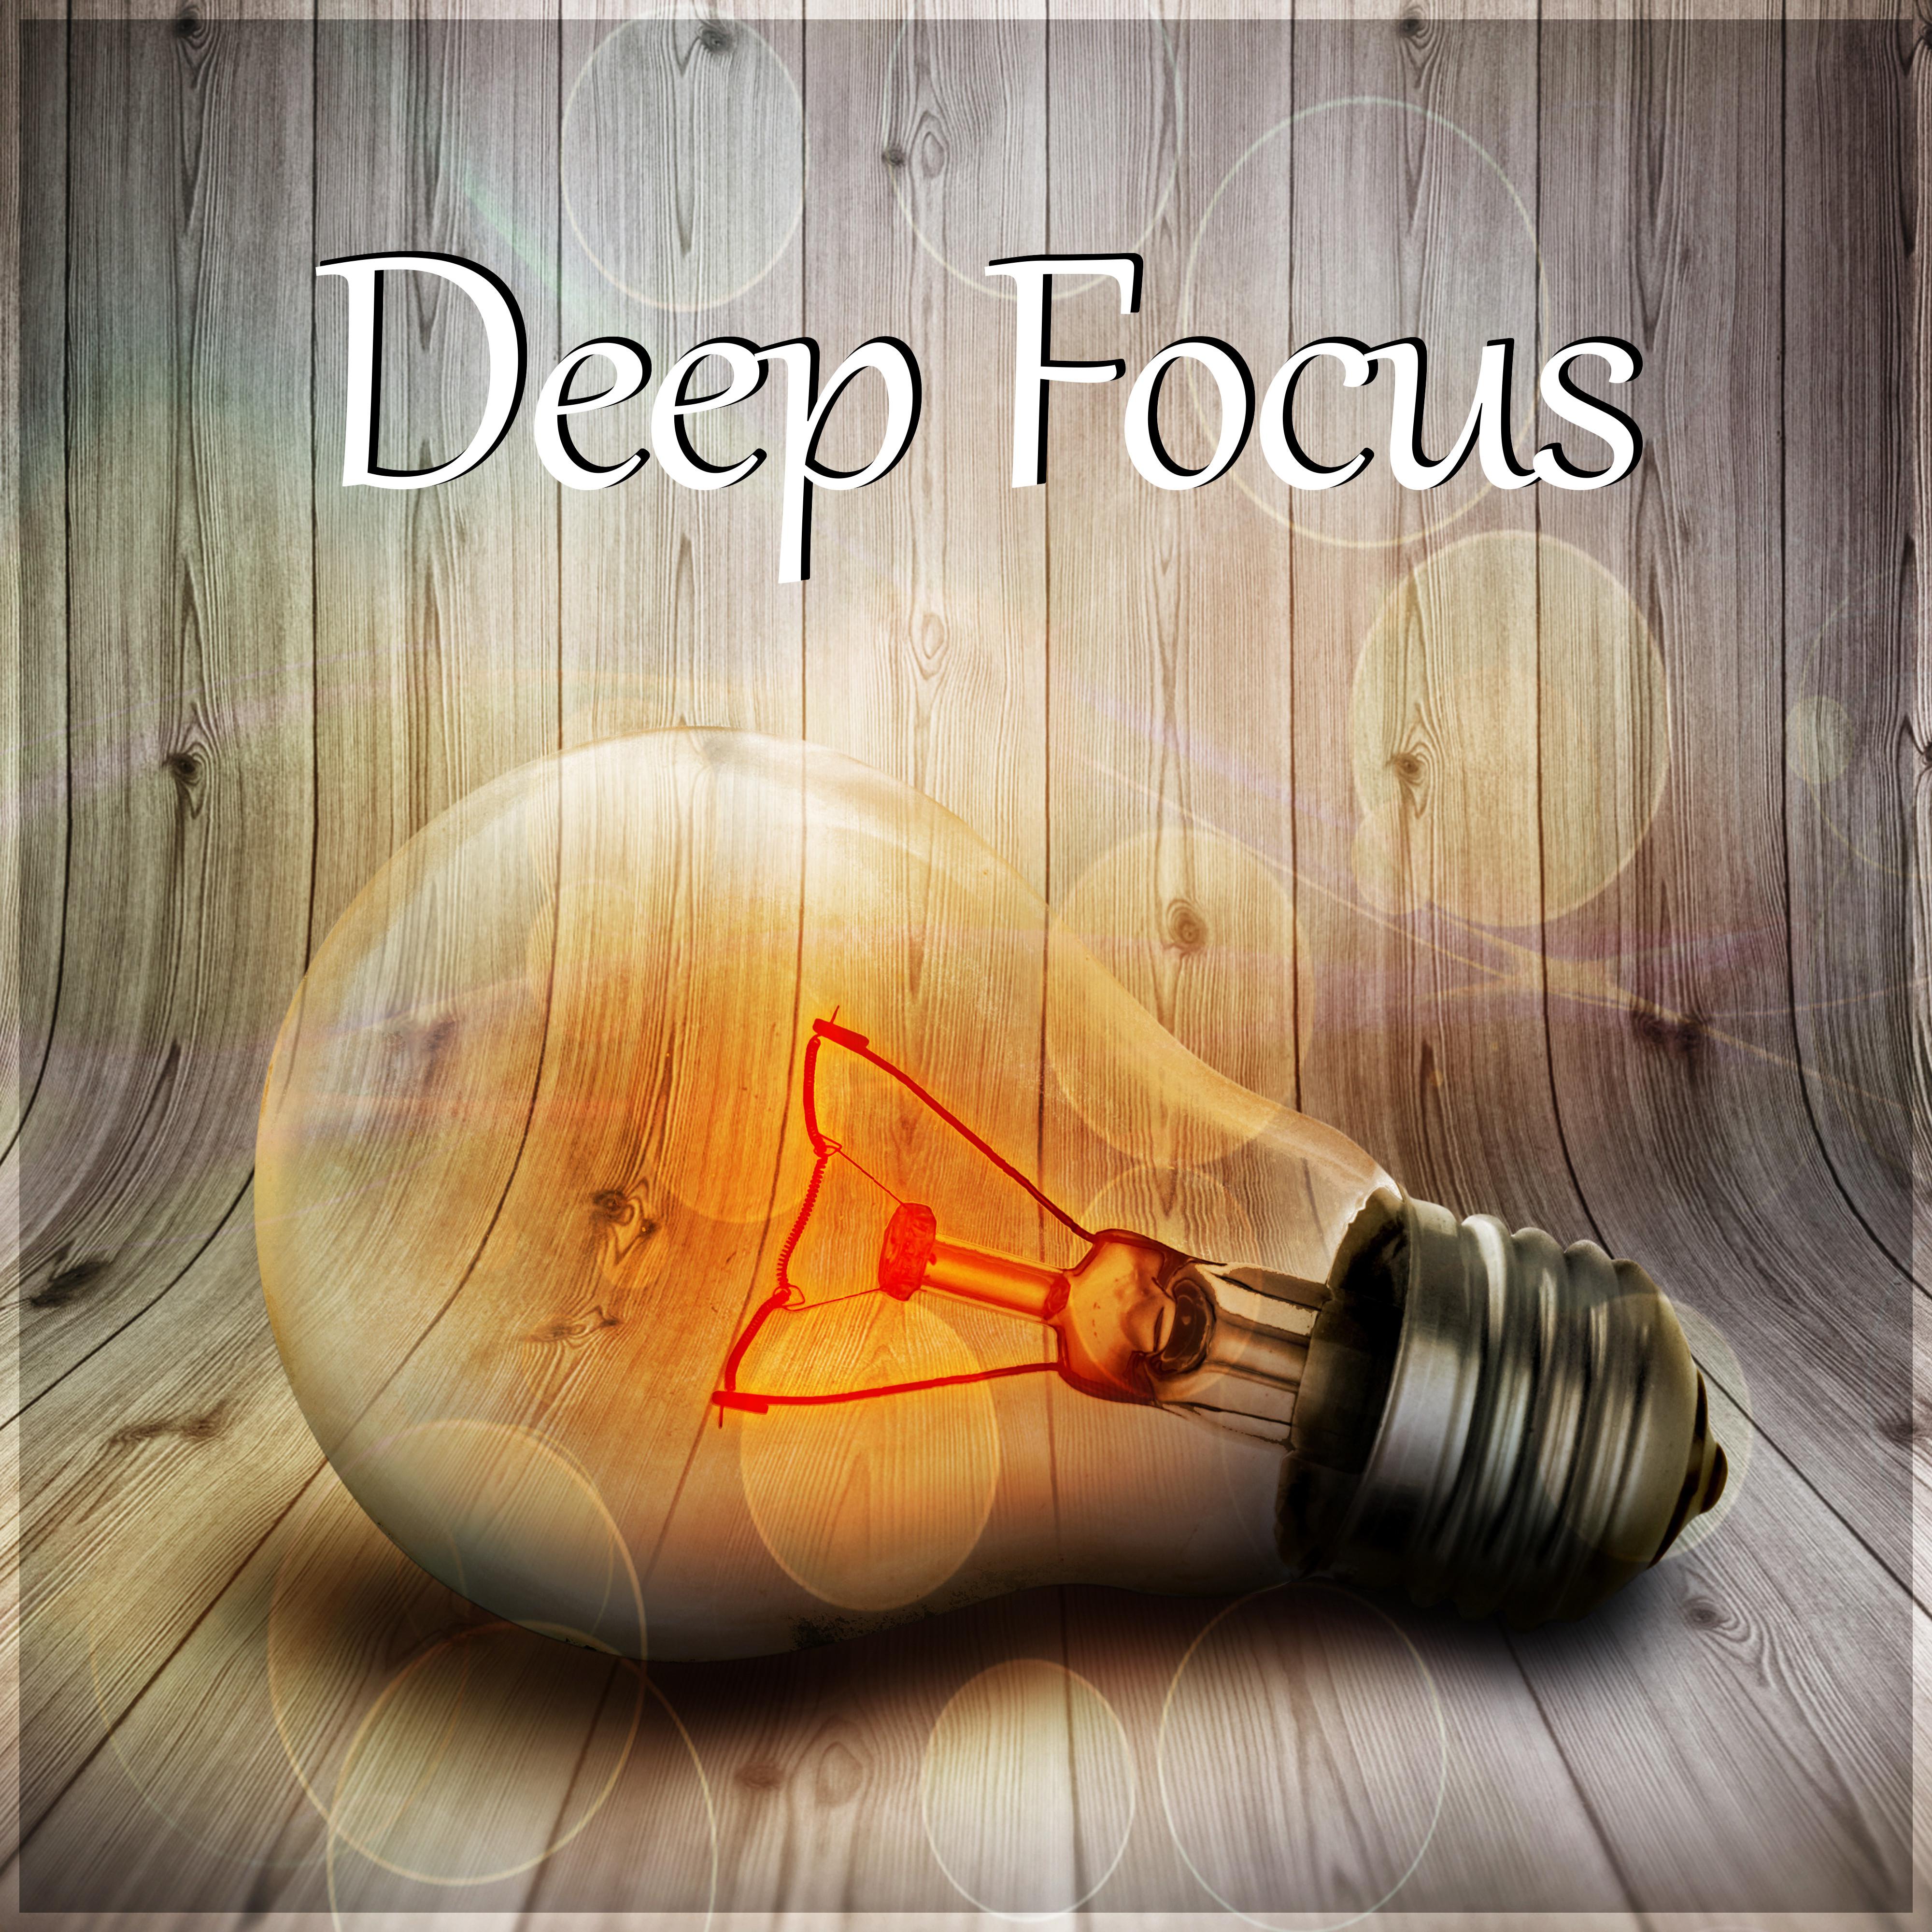 Deep Focus  Music for Reading, Study Music, Study Sounds, Sounds of Nature, Relaxation, Exam Study